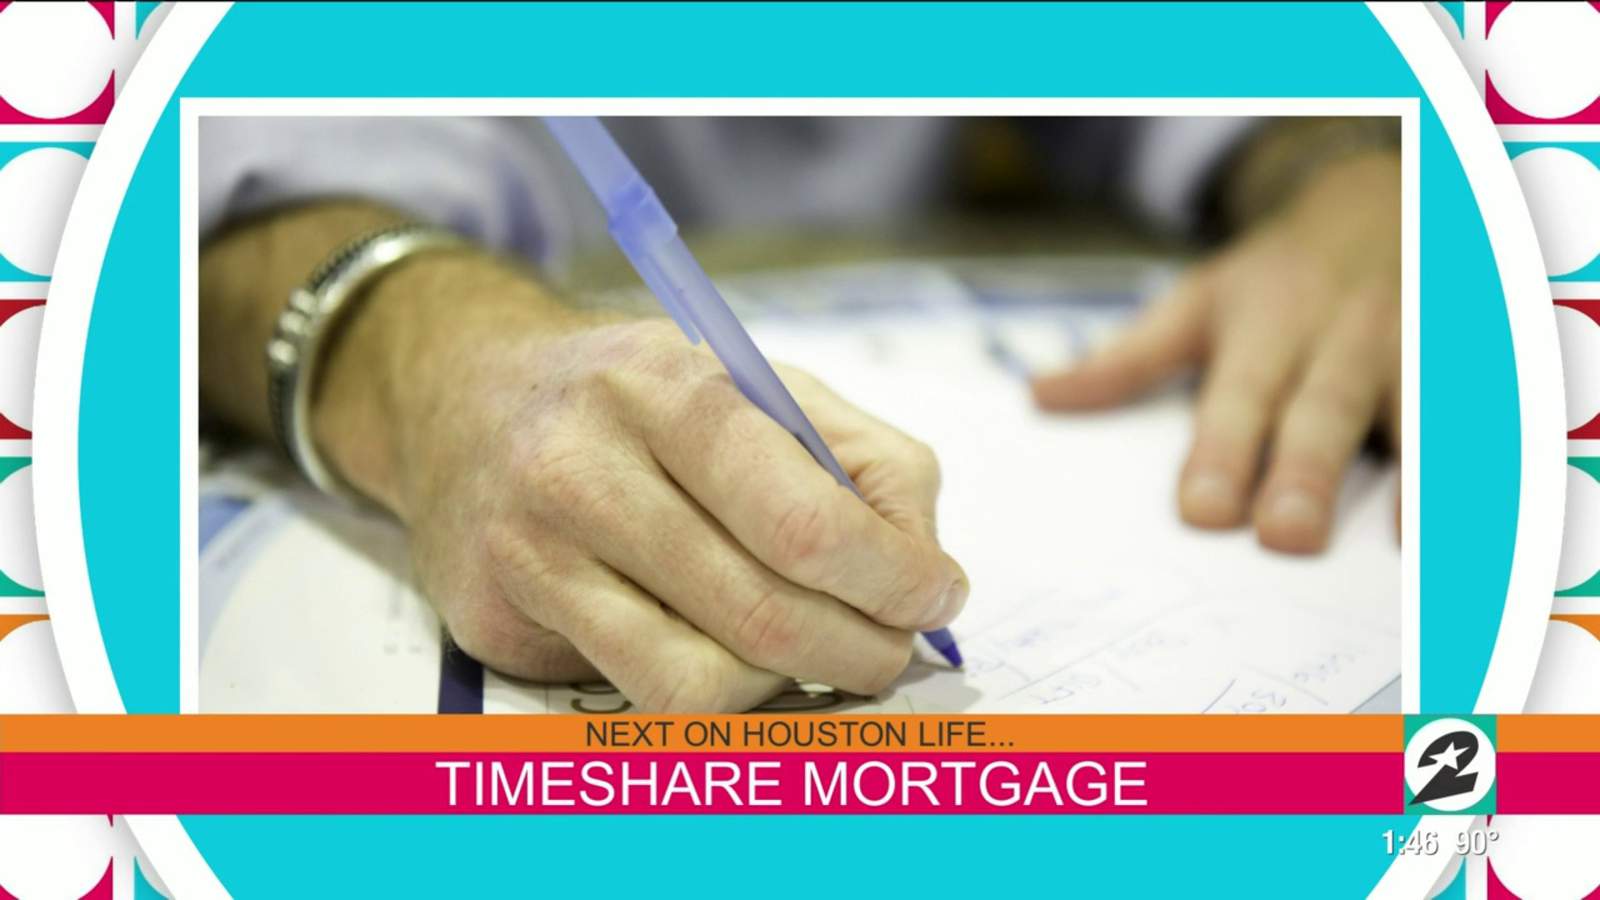 Get a timeshare mortgage payment credit with Timeshare Termination Team